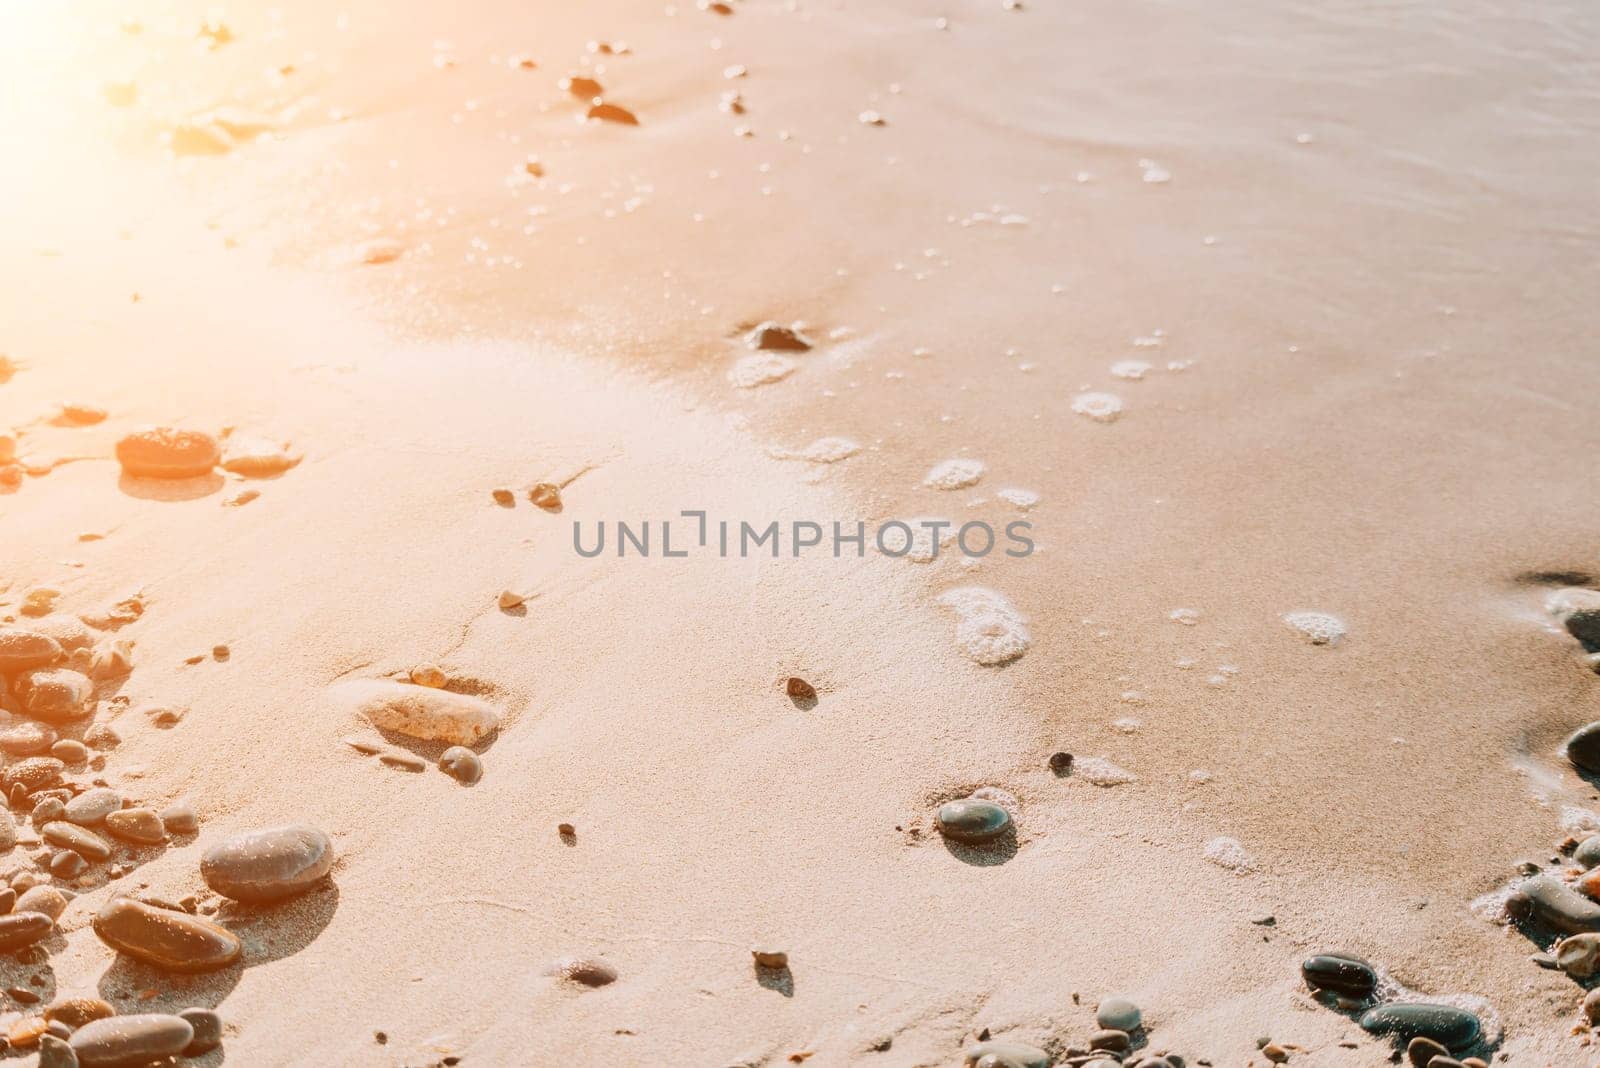 Abstract sea summer ocean sunset nature background. Sound of small waves on golden water surface in motion blur with golden bokeh lights from sun. Holiday, vacation and recreational concept.